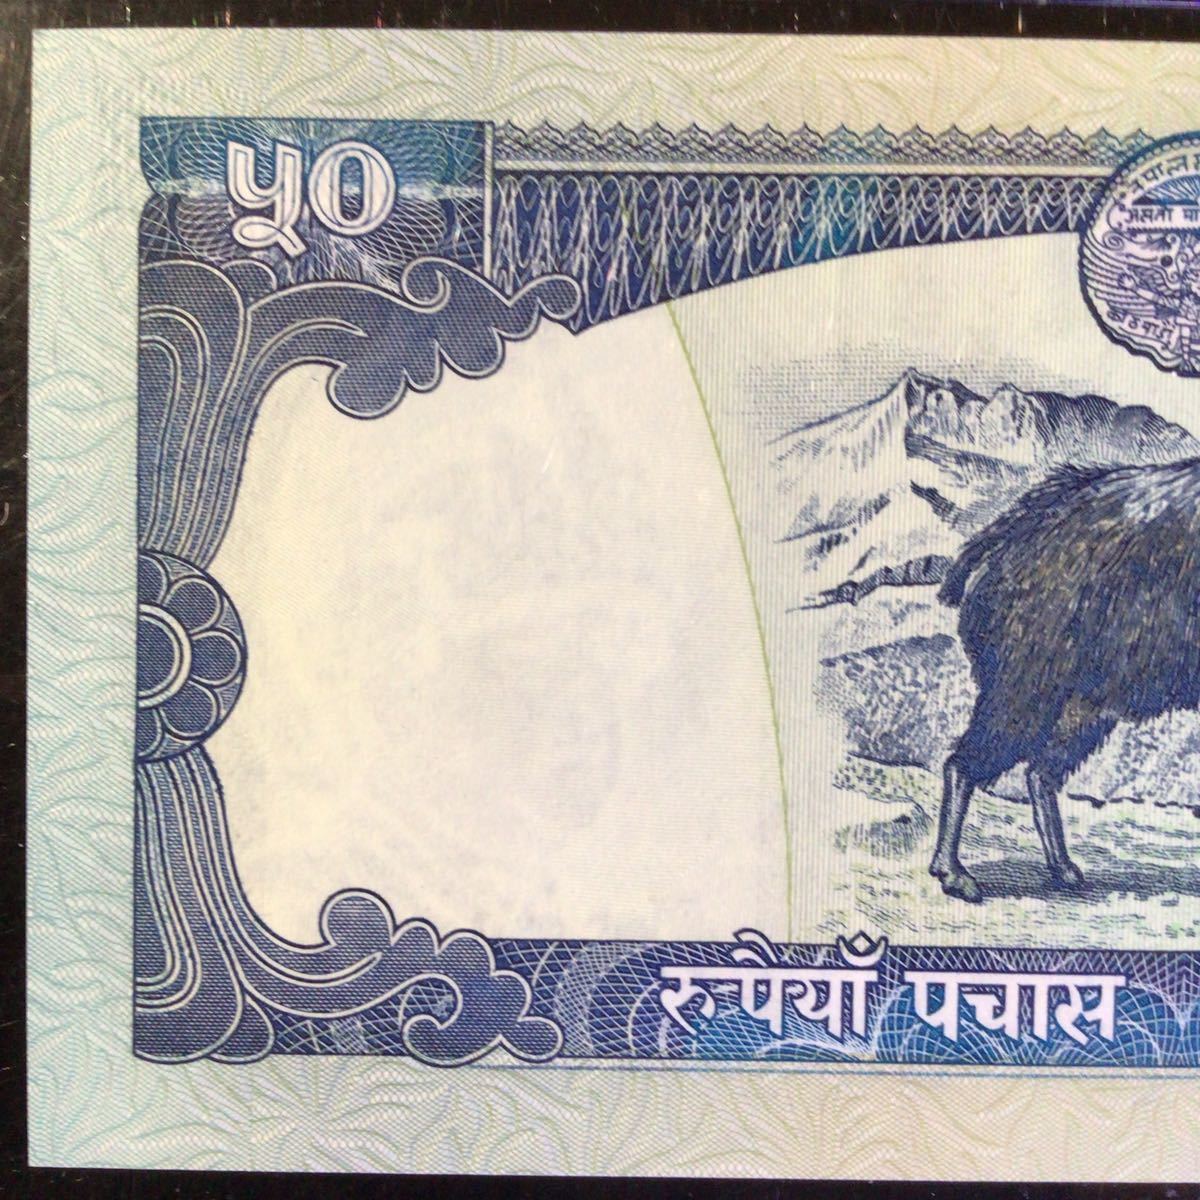 World Banknote Grading NEPAL《Central Bank》50 Rupees【2002】『PMG Grading Gem Uncirculated 65 EPQ』_画像6